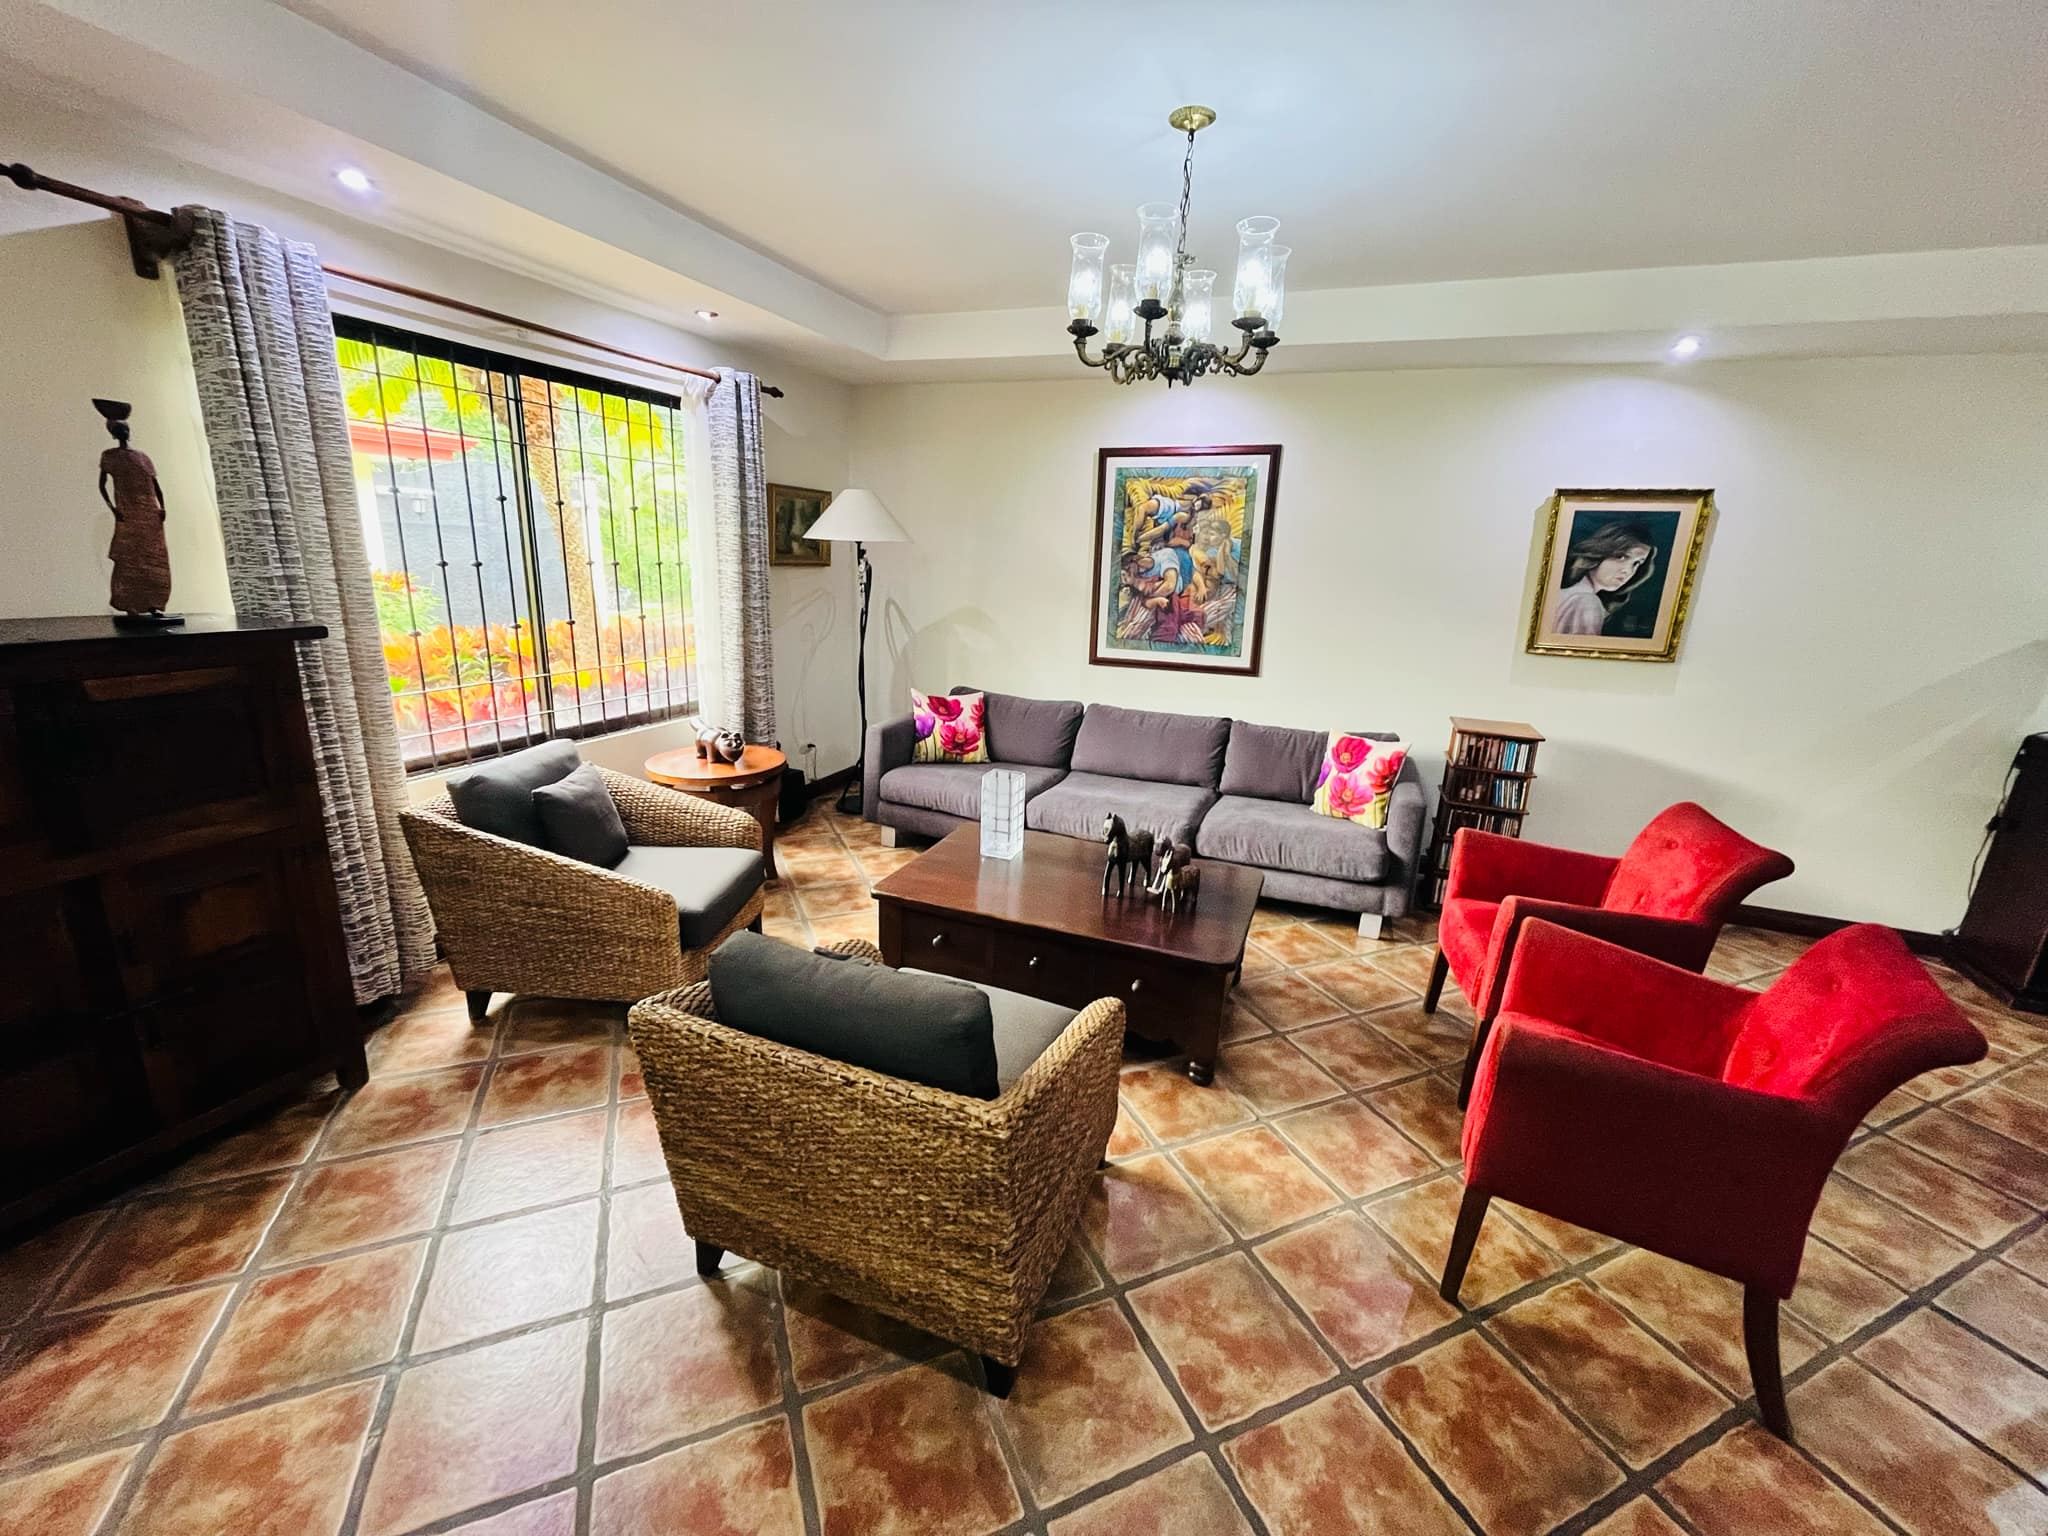 House for sale in Escazu condominium and can be received